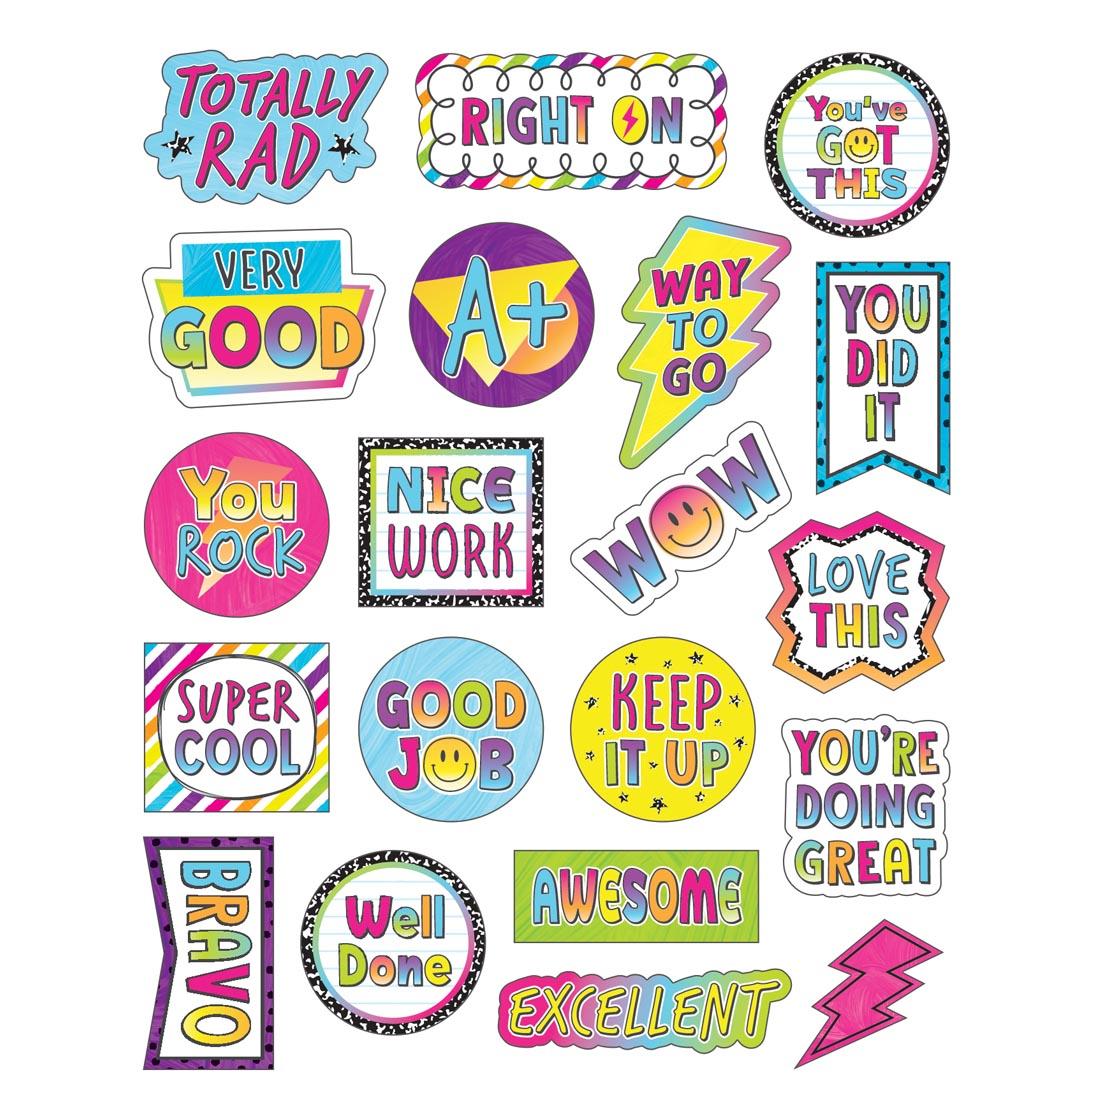 Reward Stickers from the Brights 4Ever collection by Teacher Created Resources